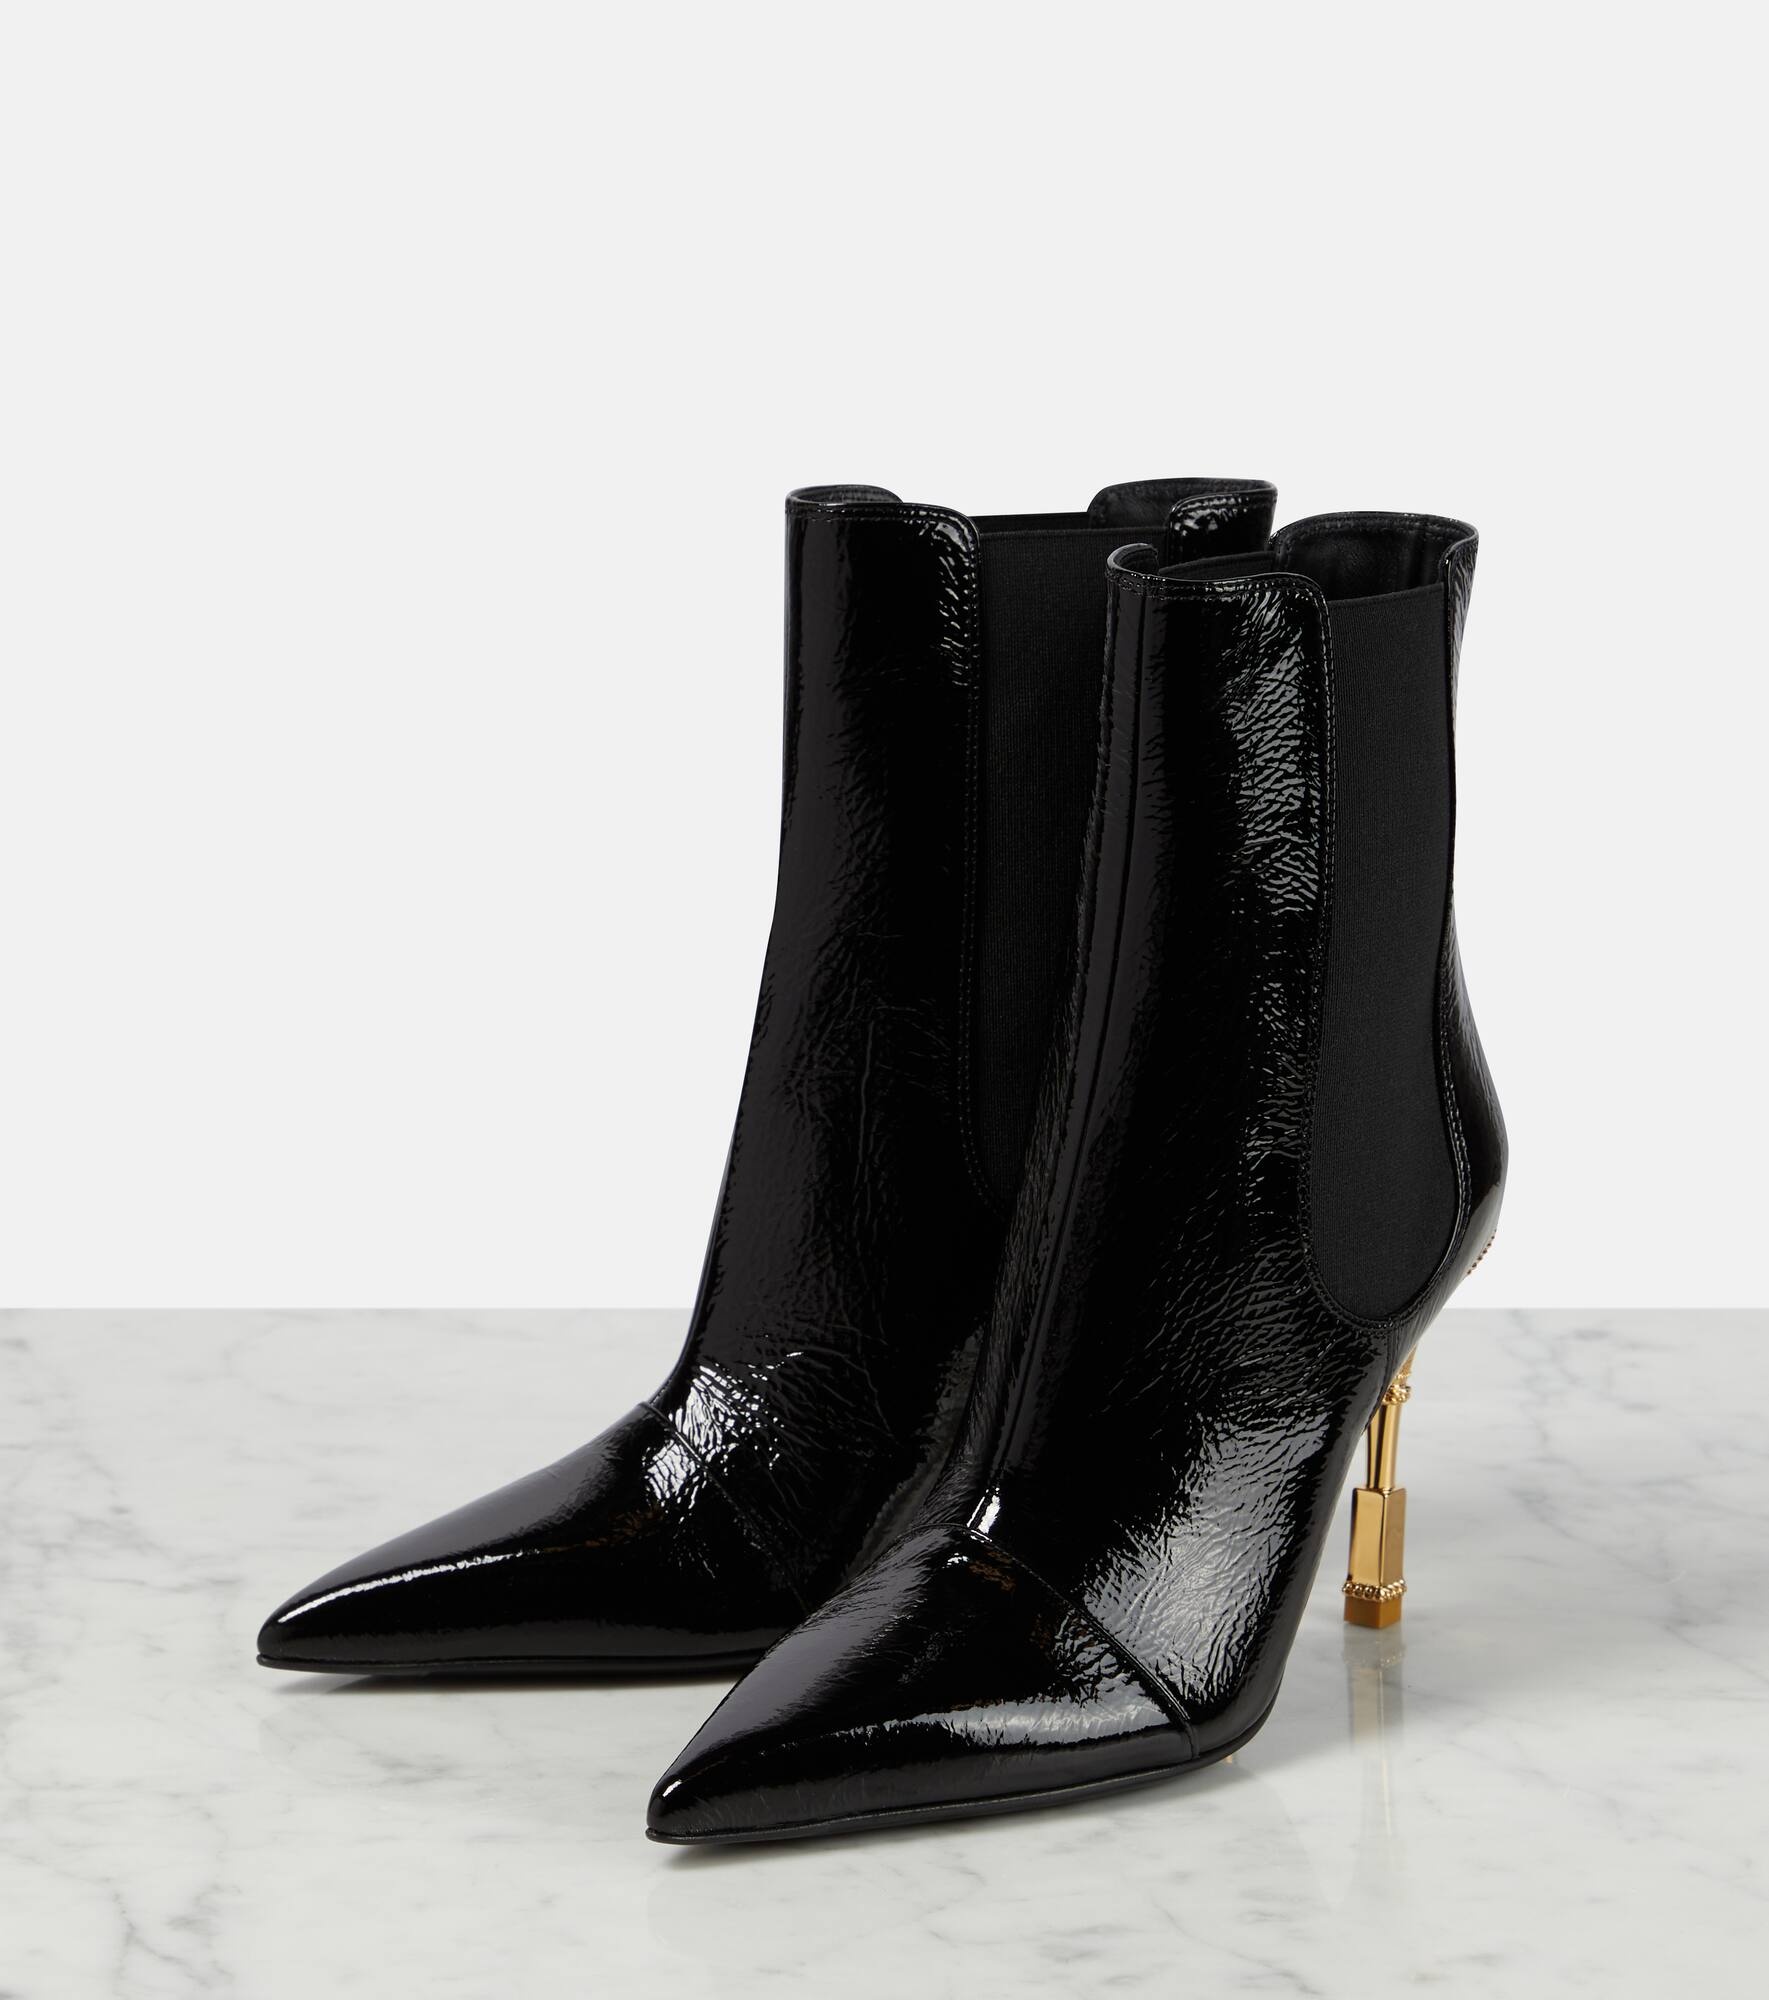 Patent leather ankle boots - 5